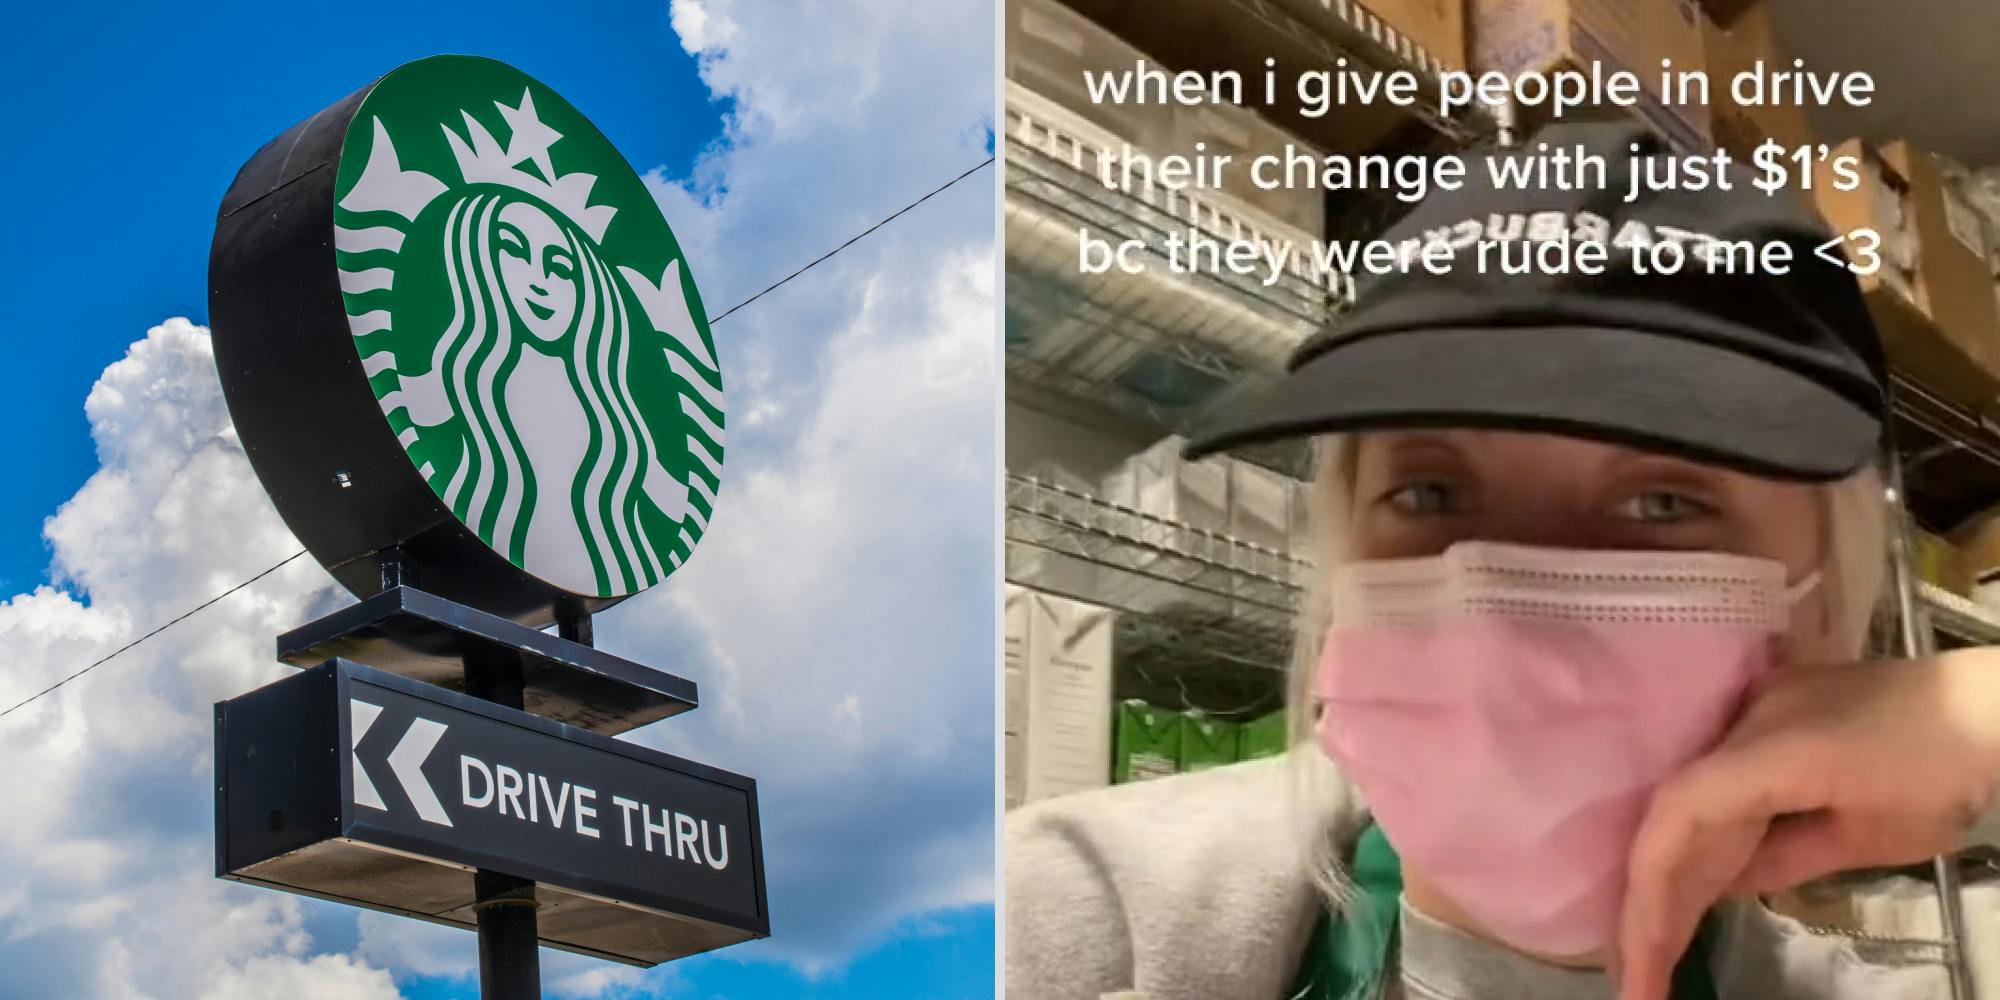 Starbucks drive thru sign with blue skies and white clouds (l) Starbucks barista caption " when i give people in drive their change with just $1's bc they were rude to me heart" (r)